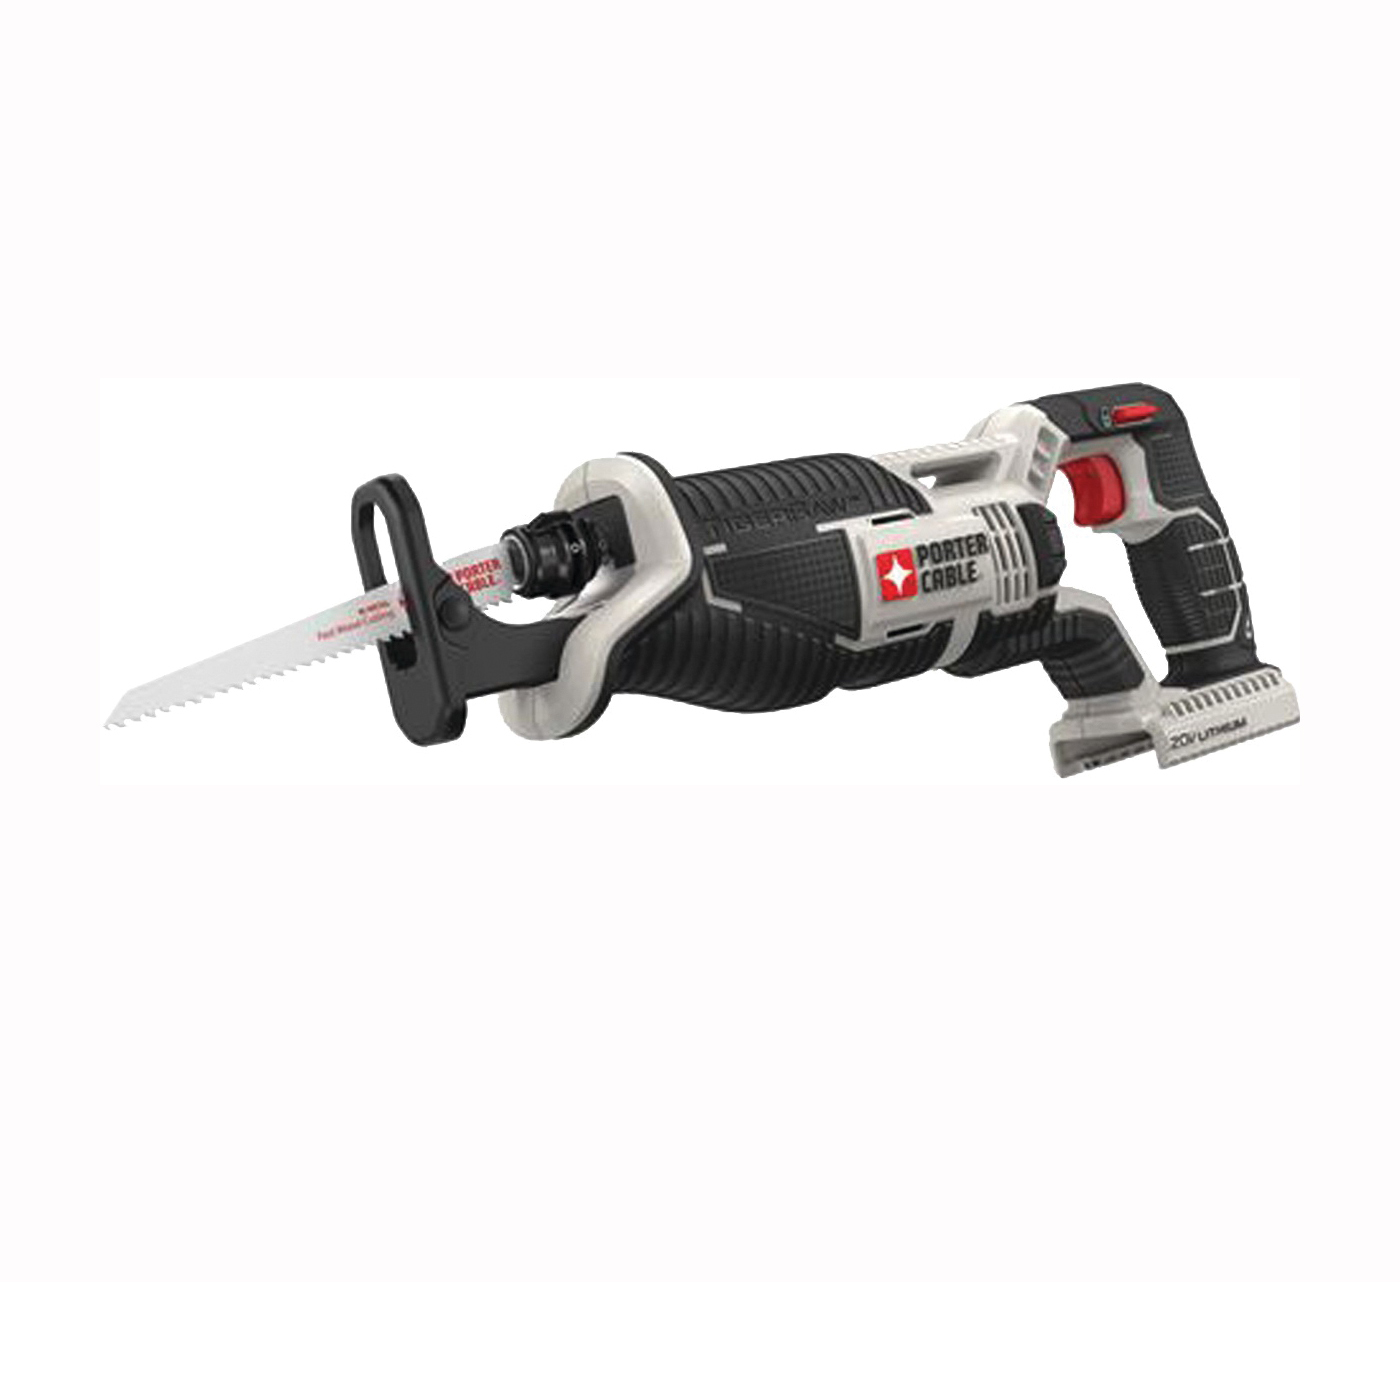 PCC670B Reciprocating Tiger Saw, Tool Only, 20 V, 1 in L Stroke, 0 to 3000 spm